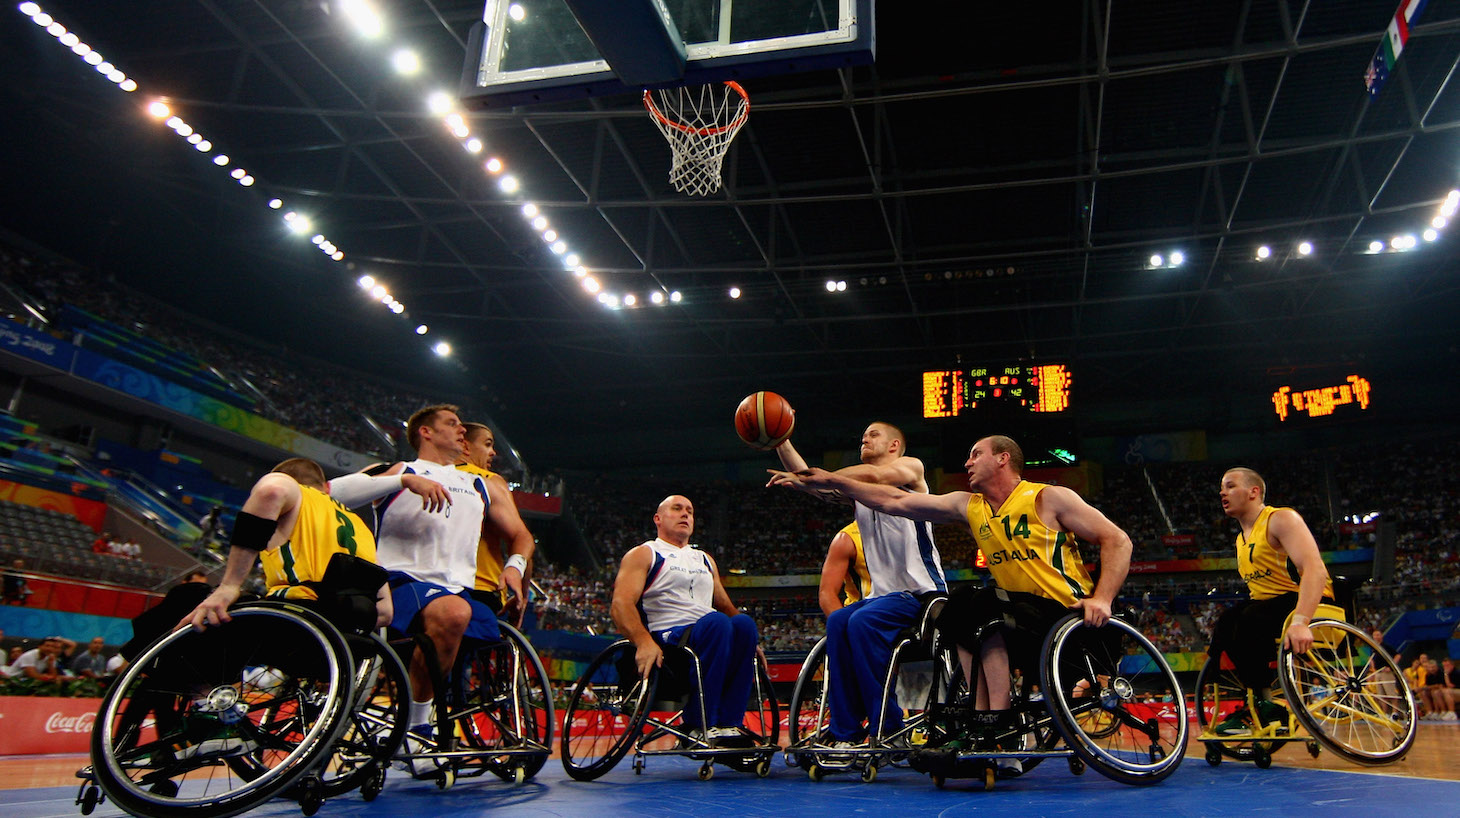 BEIJING - SEPTEMBER 14: Jonathan Hall of Great Britain battles with Brendan Dowler of Australia in the Wheelchair Basketball match between Australia and Great Britain at the National Indoor Stadium during day eight of the 2008 Paralympic Games September 14, 2008 in Beijing, China. (Photo by Jamie McDonald/Getty Images)